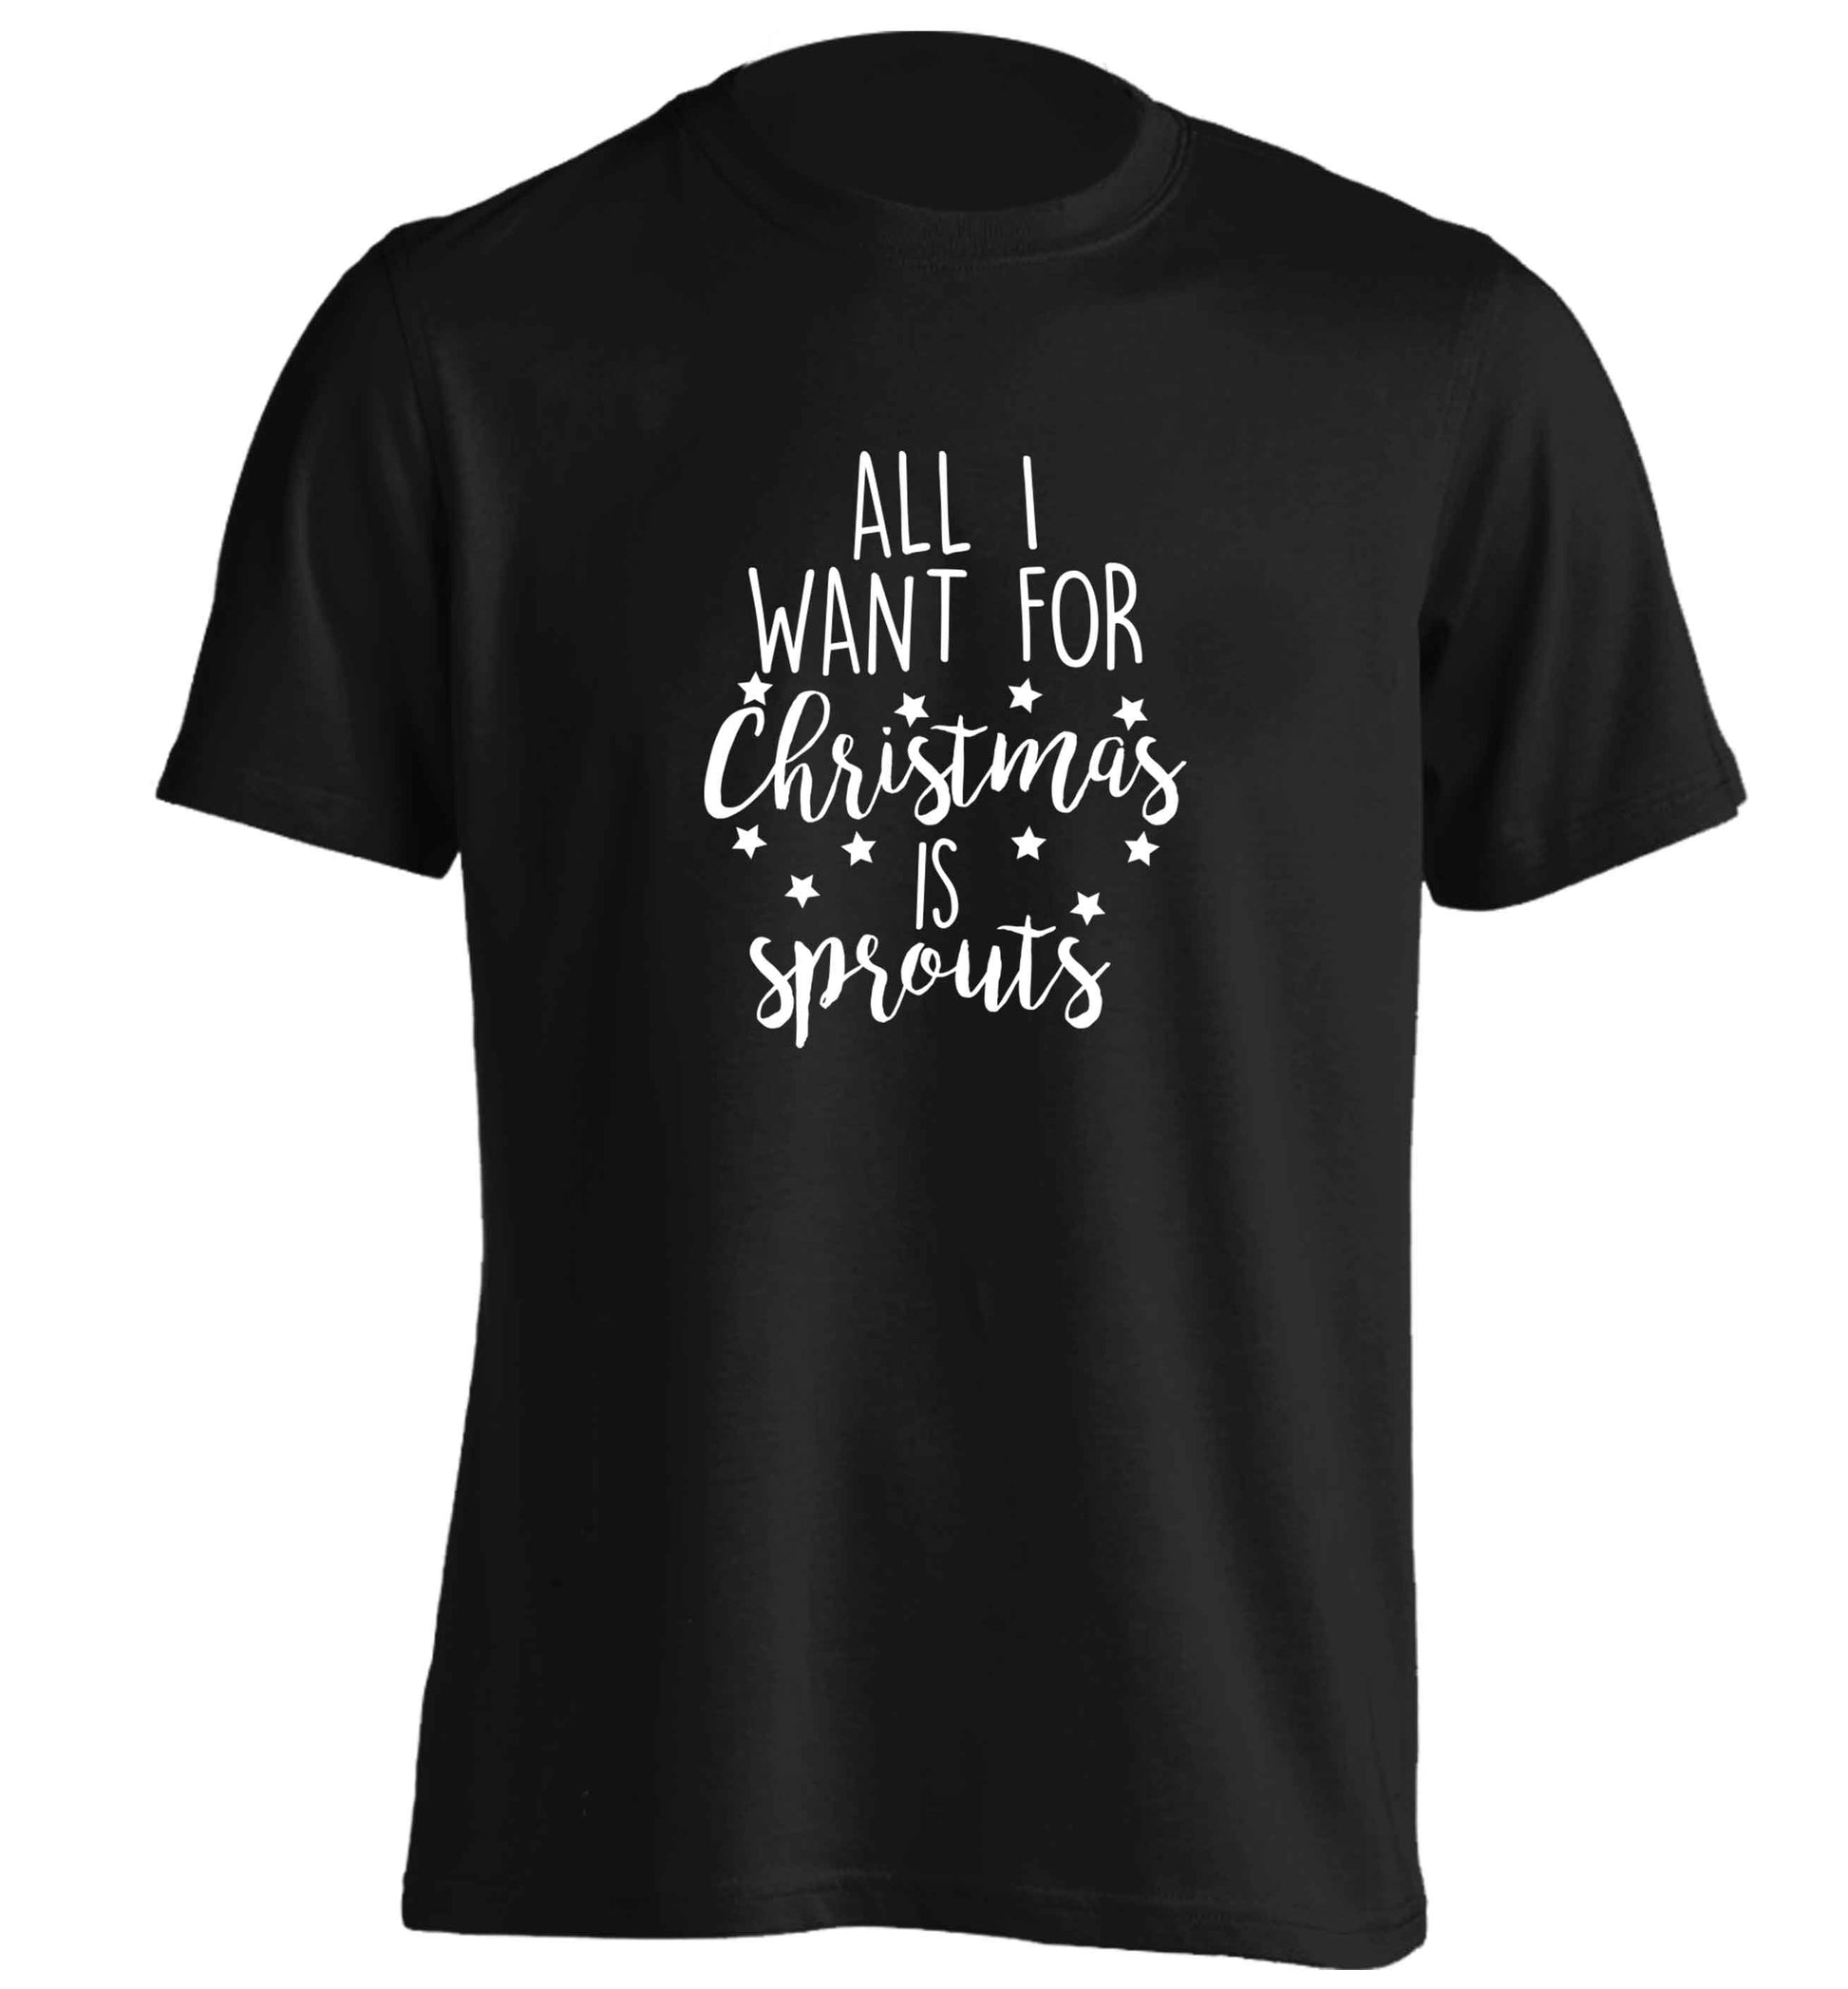 All I want for Christmas is sprouts adults unisex black Tshirt 2XL